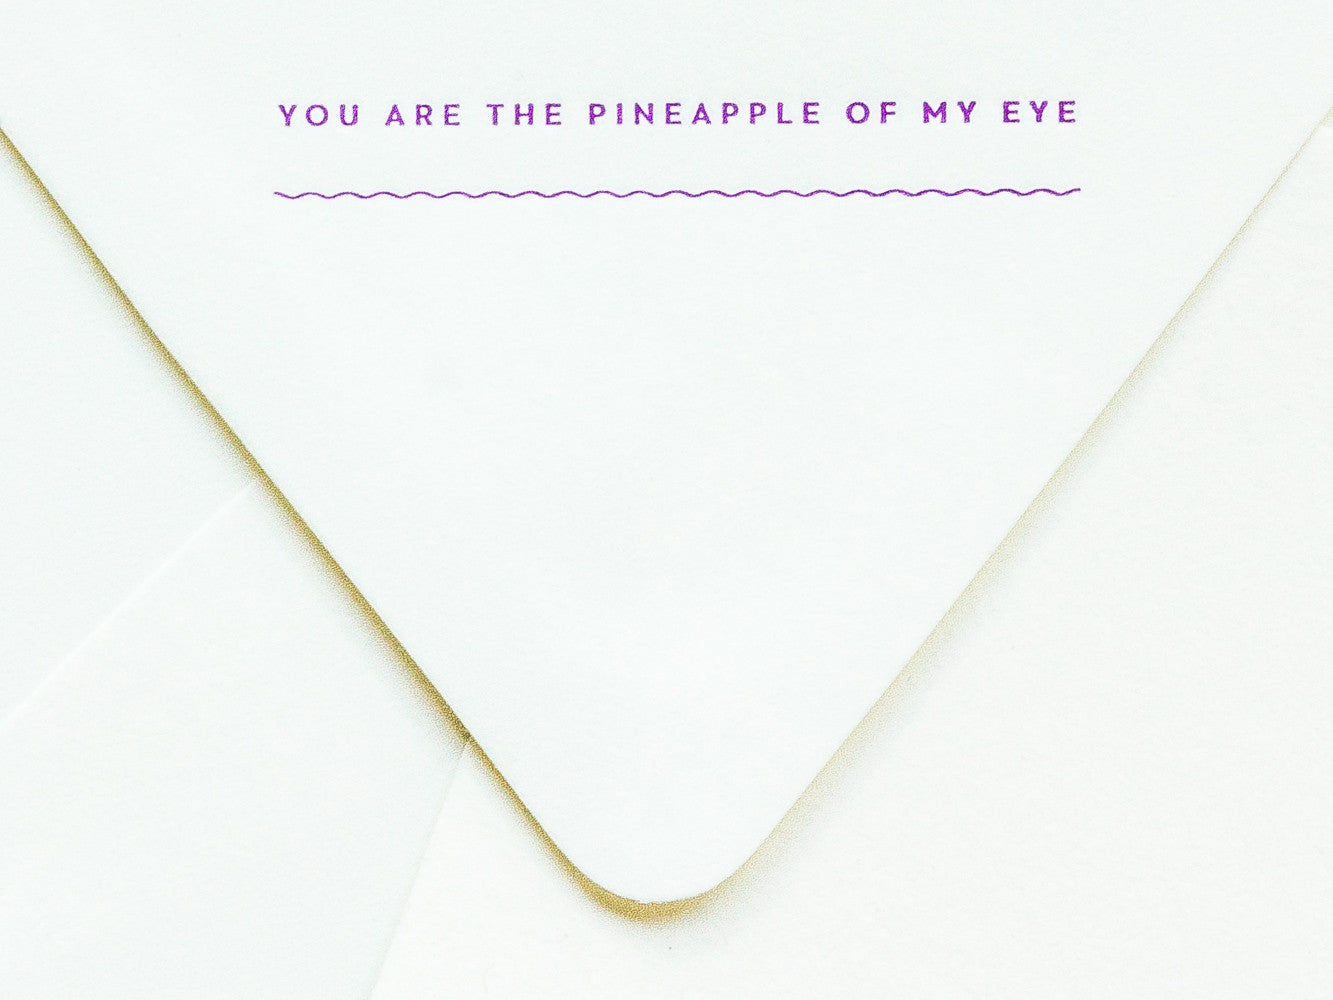 You Are the Pineapple of My Eye Notevelope & Pineapple Notecard